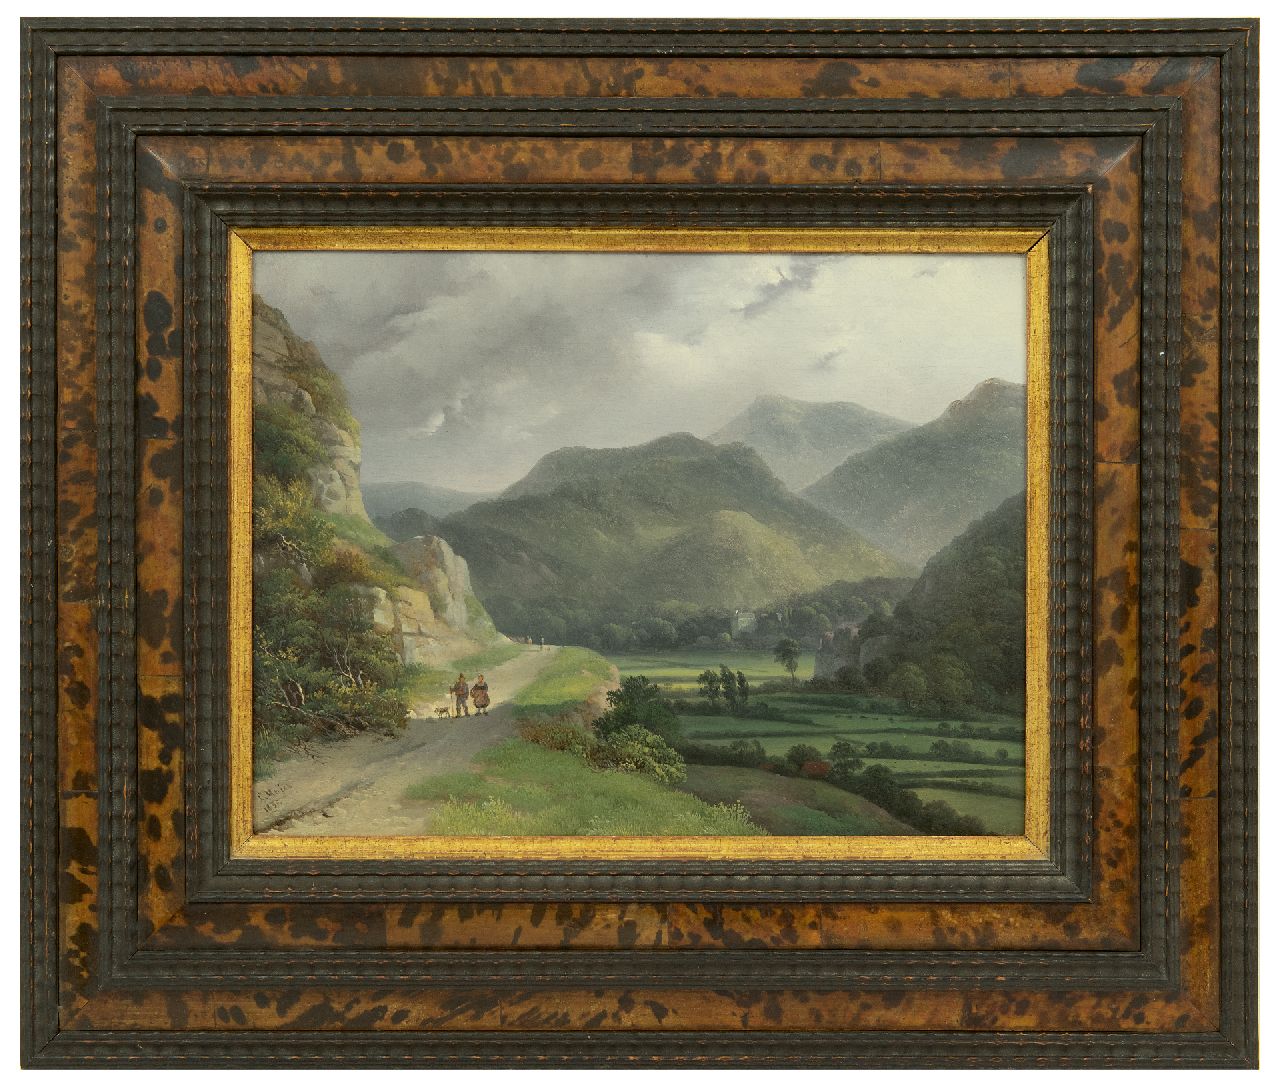 Meijer J.H.L.  | Johan Hendrik 'Louis' Meijer | Paintings offered for sale | Mountain landscape, oil on panel 26.0 x 34.6 cm, signed l.l. and dated 1833